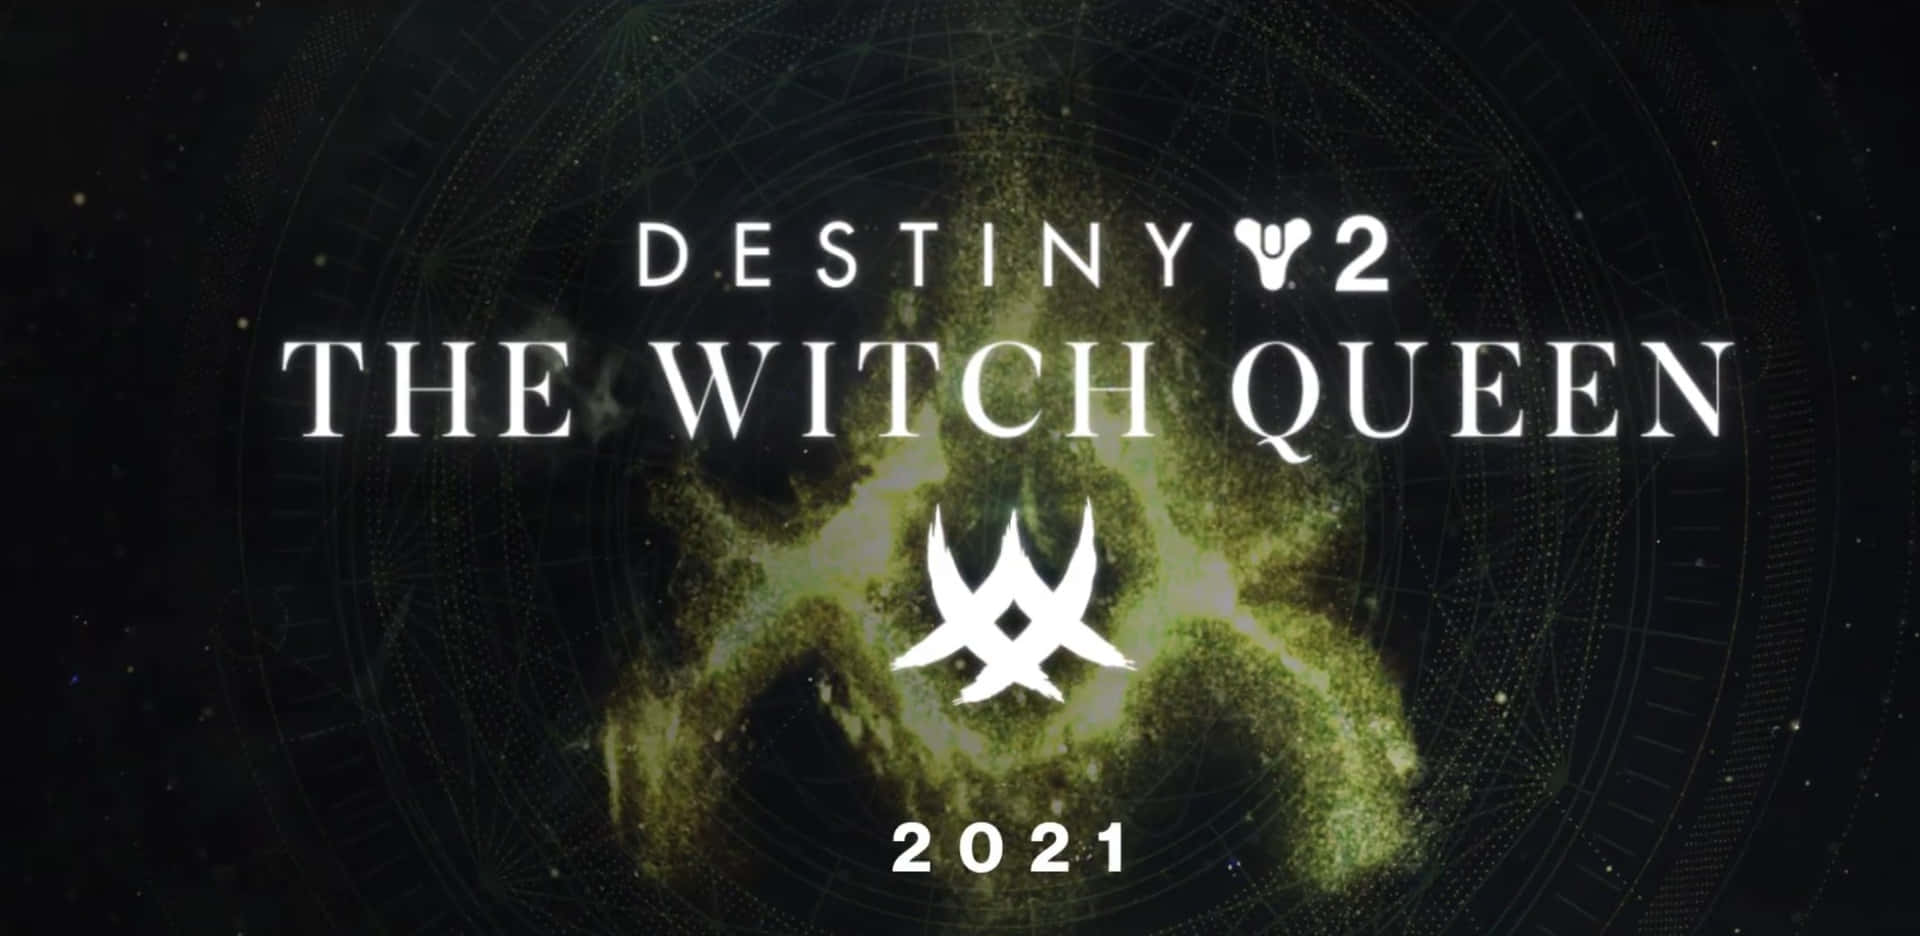 Destiny 2 The Witch Queen 2021 Wallpaper